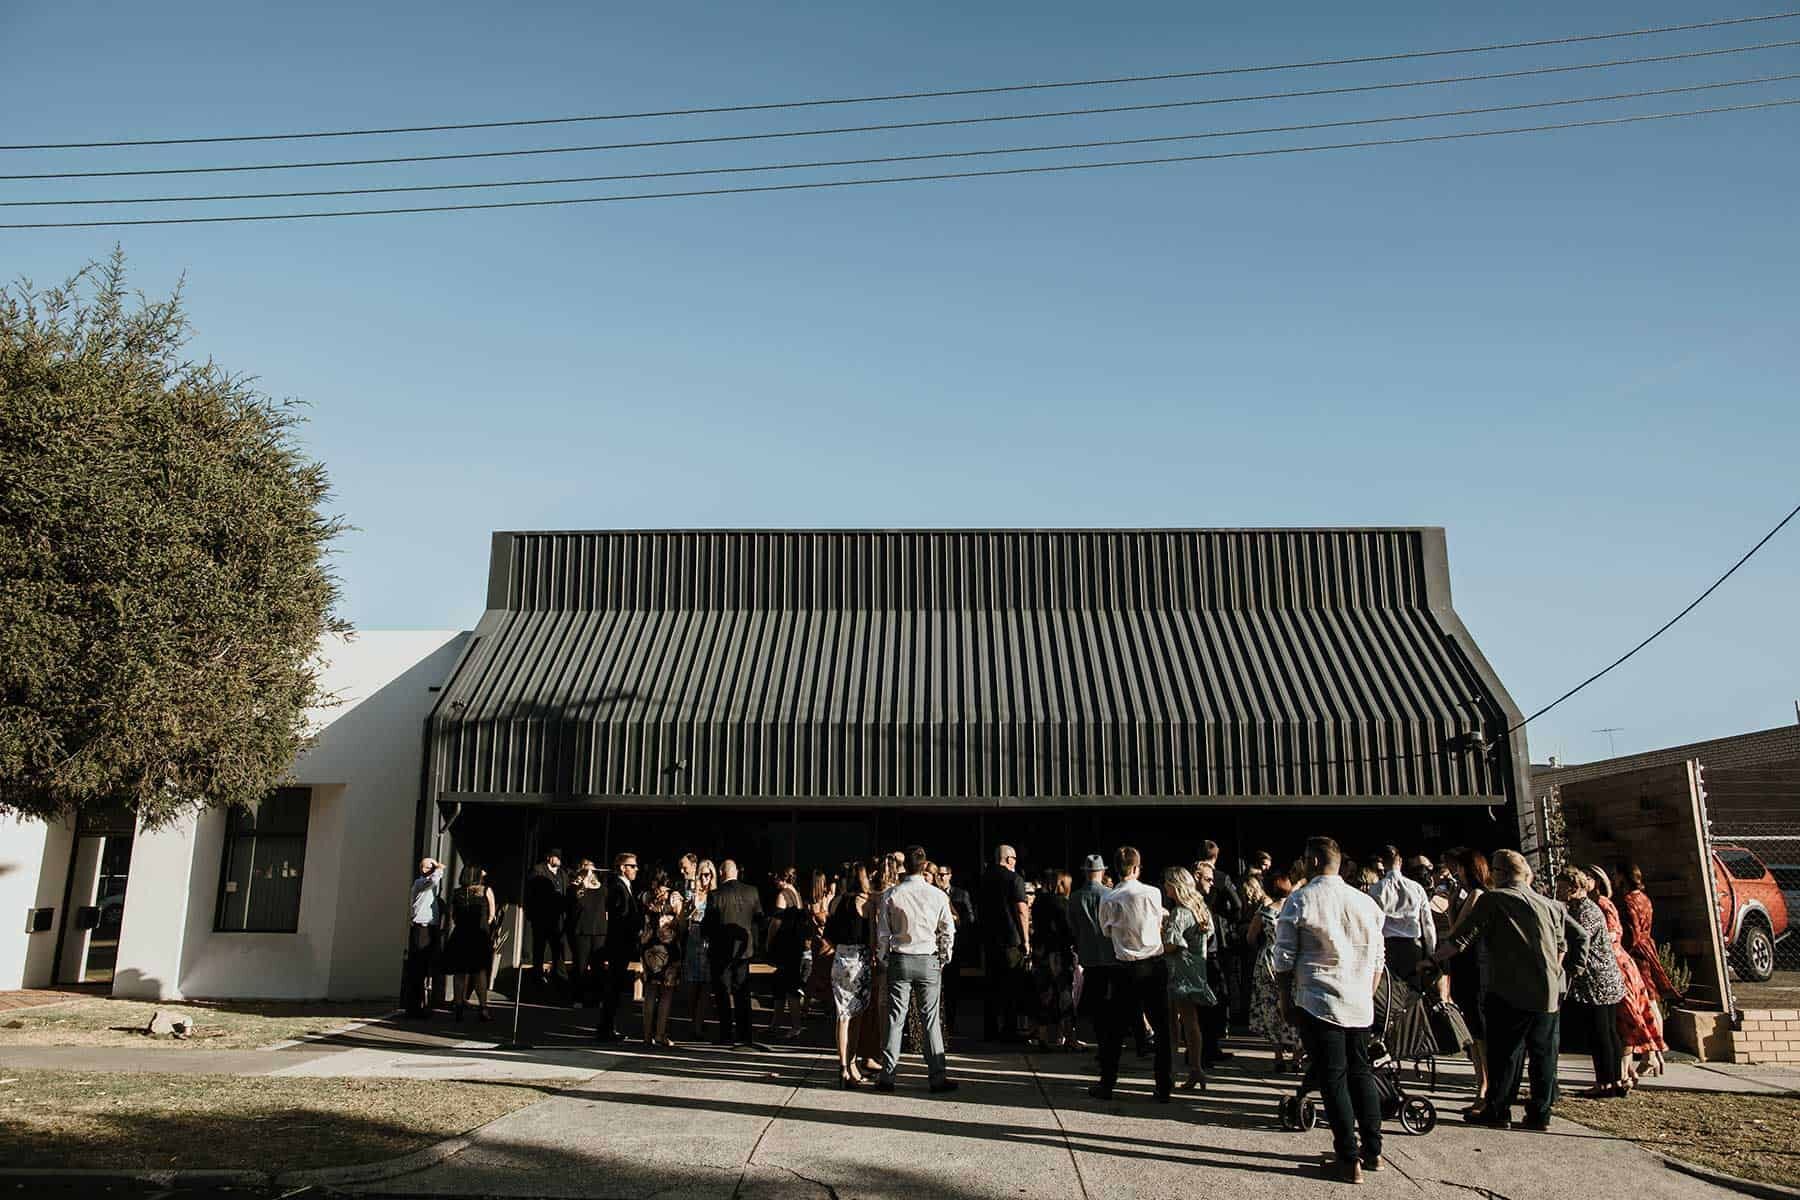 industrial warehouse wedding venue in Perth - Locally Crafted